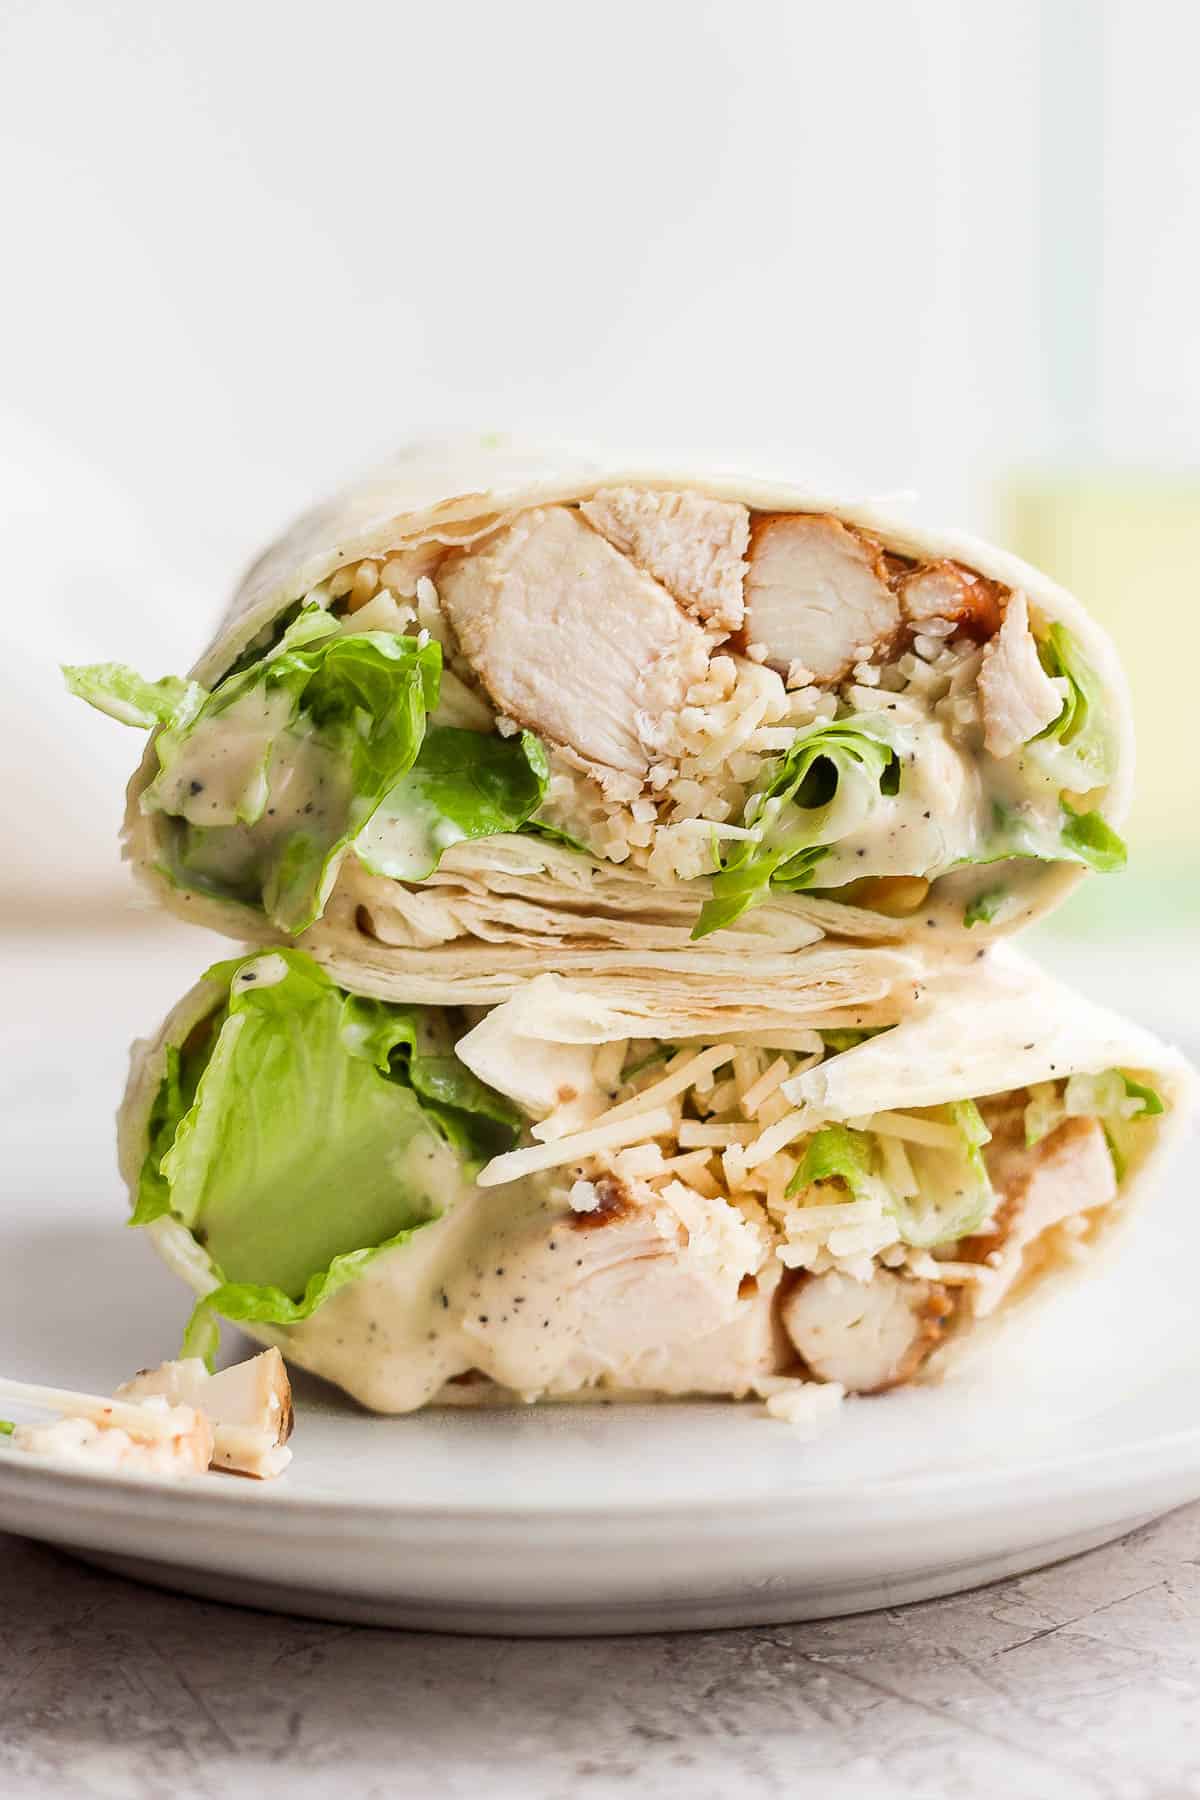 Two halves of a chicken caesar wrap on a plate.